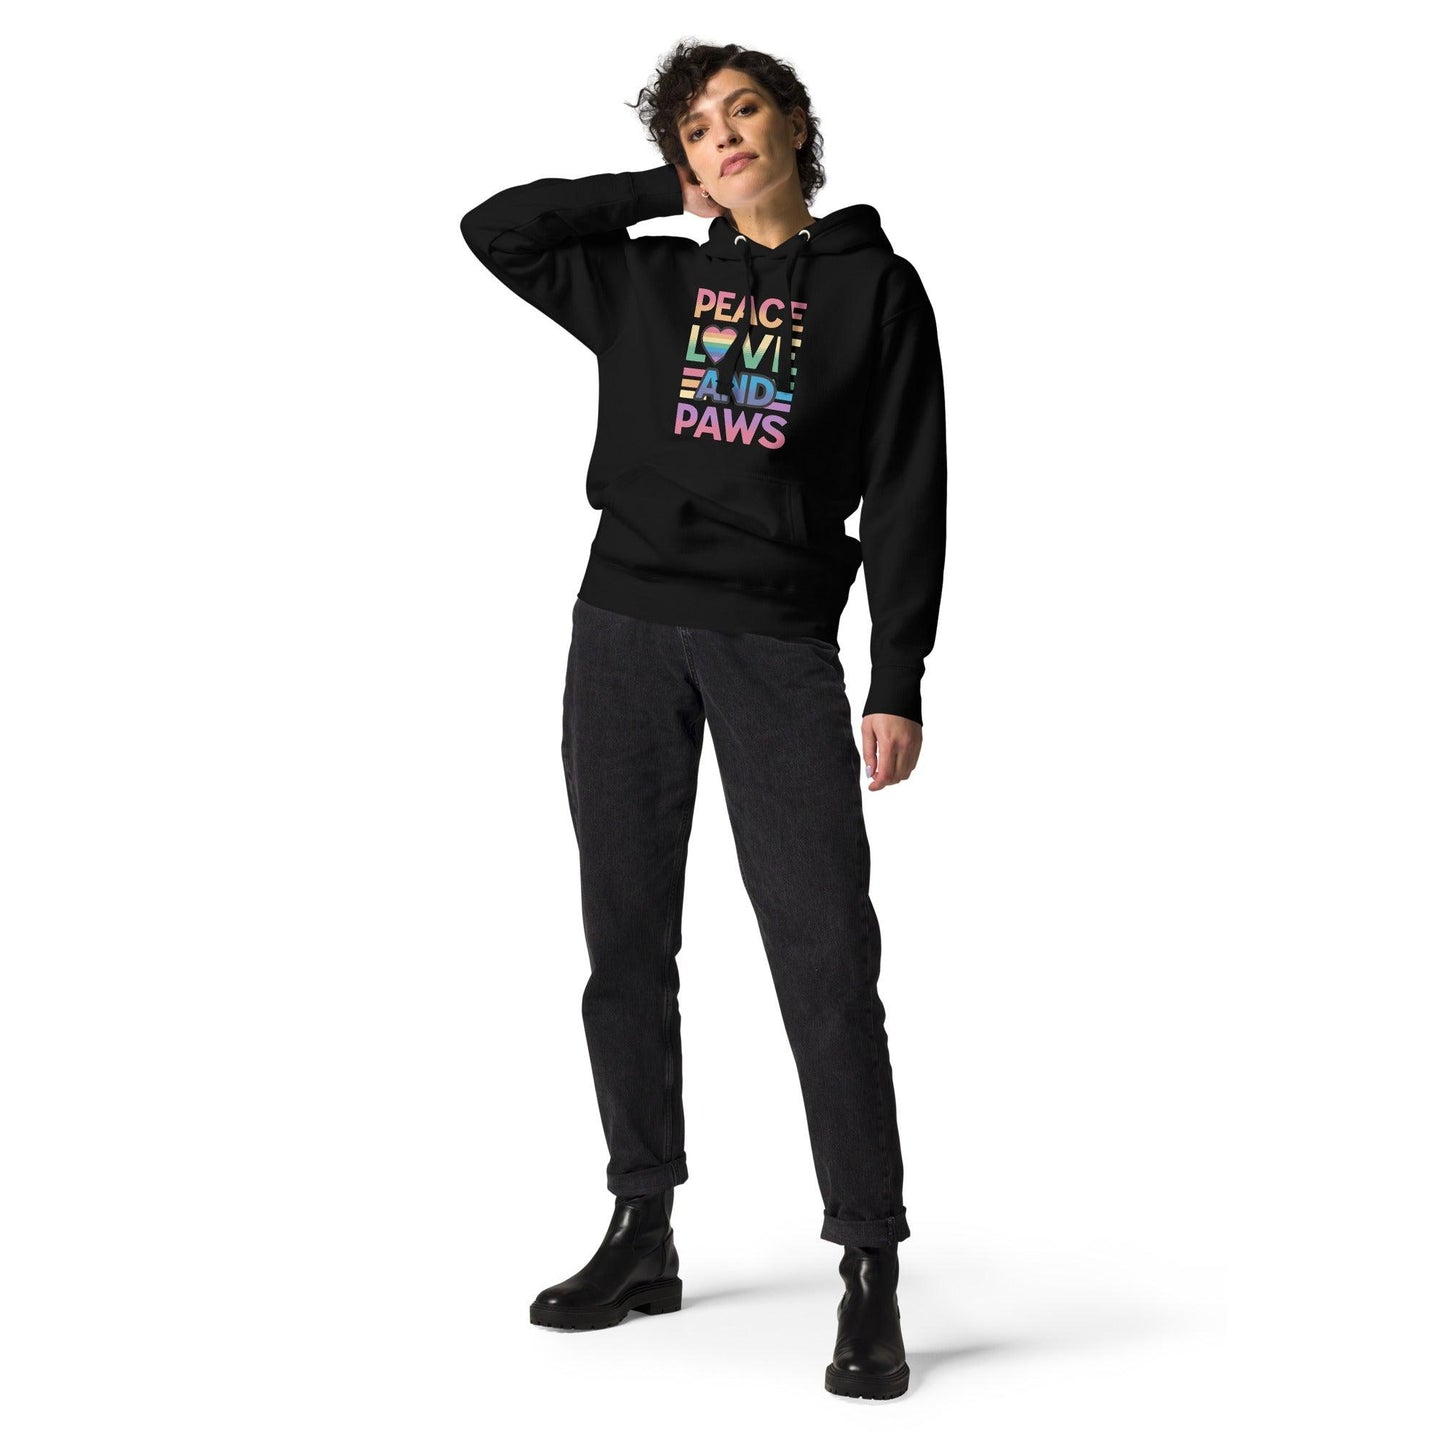 Peace, Love, and Paws Classic Hoodie - Pet Pride Tees